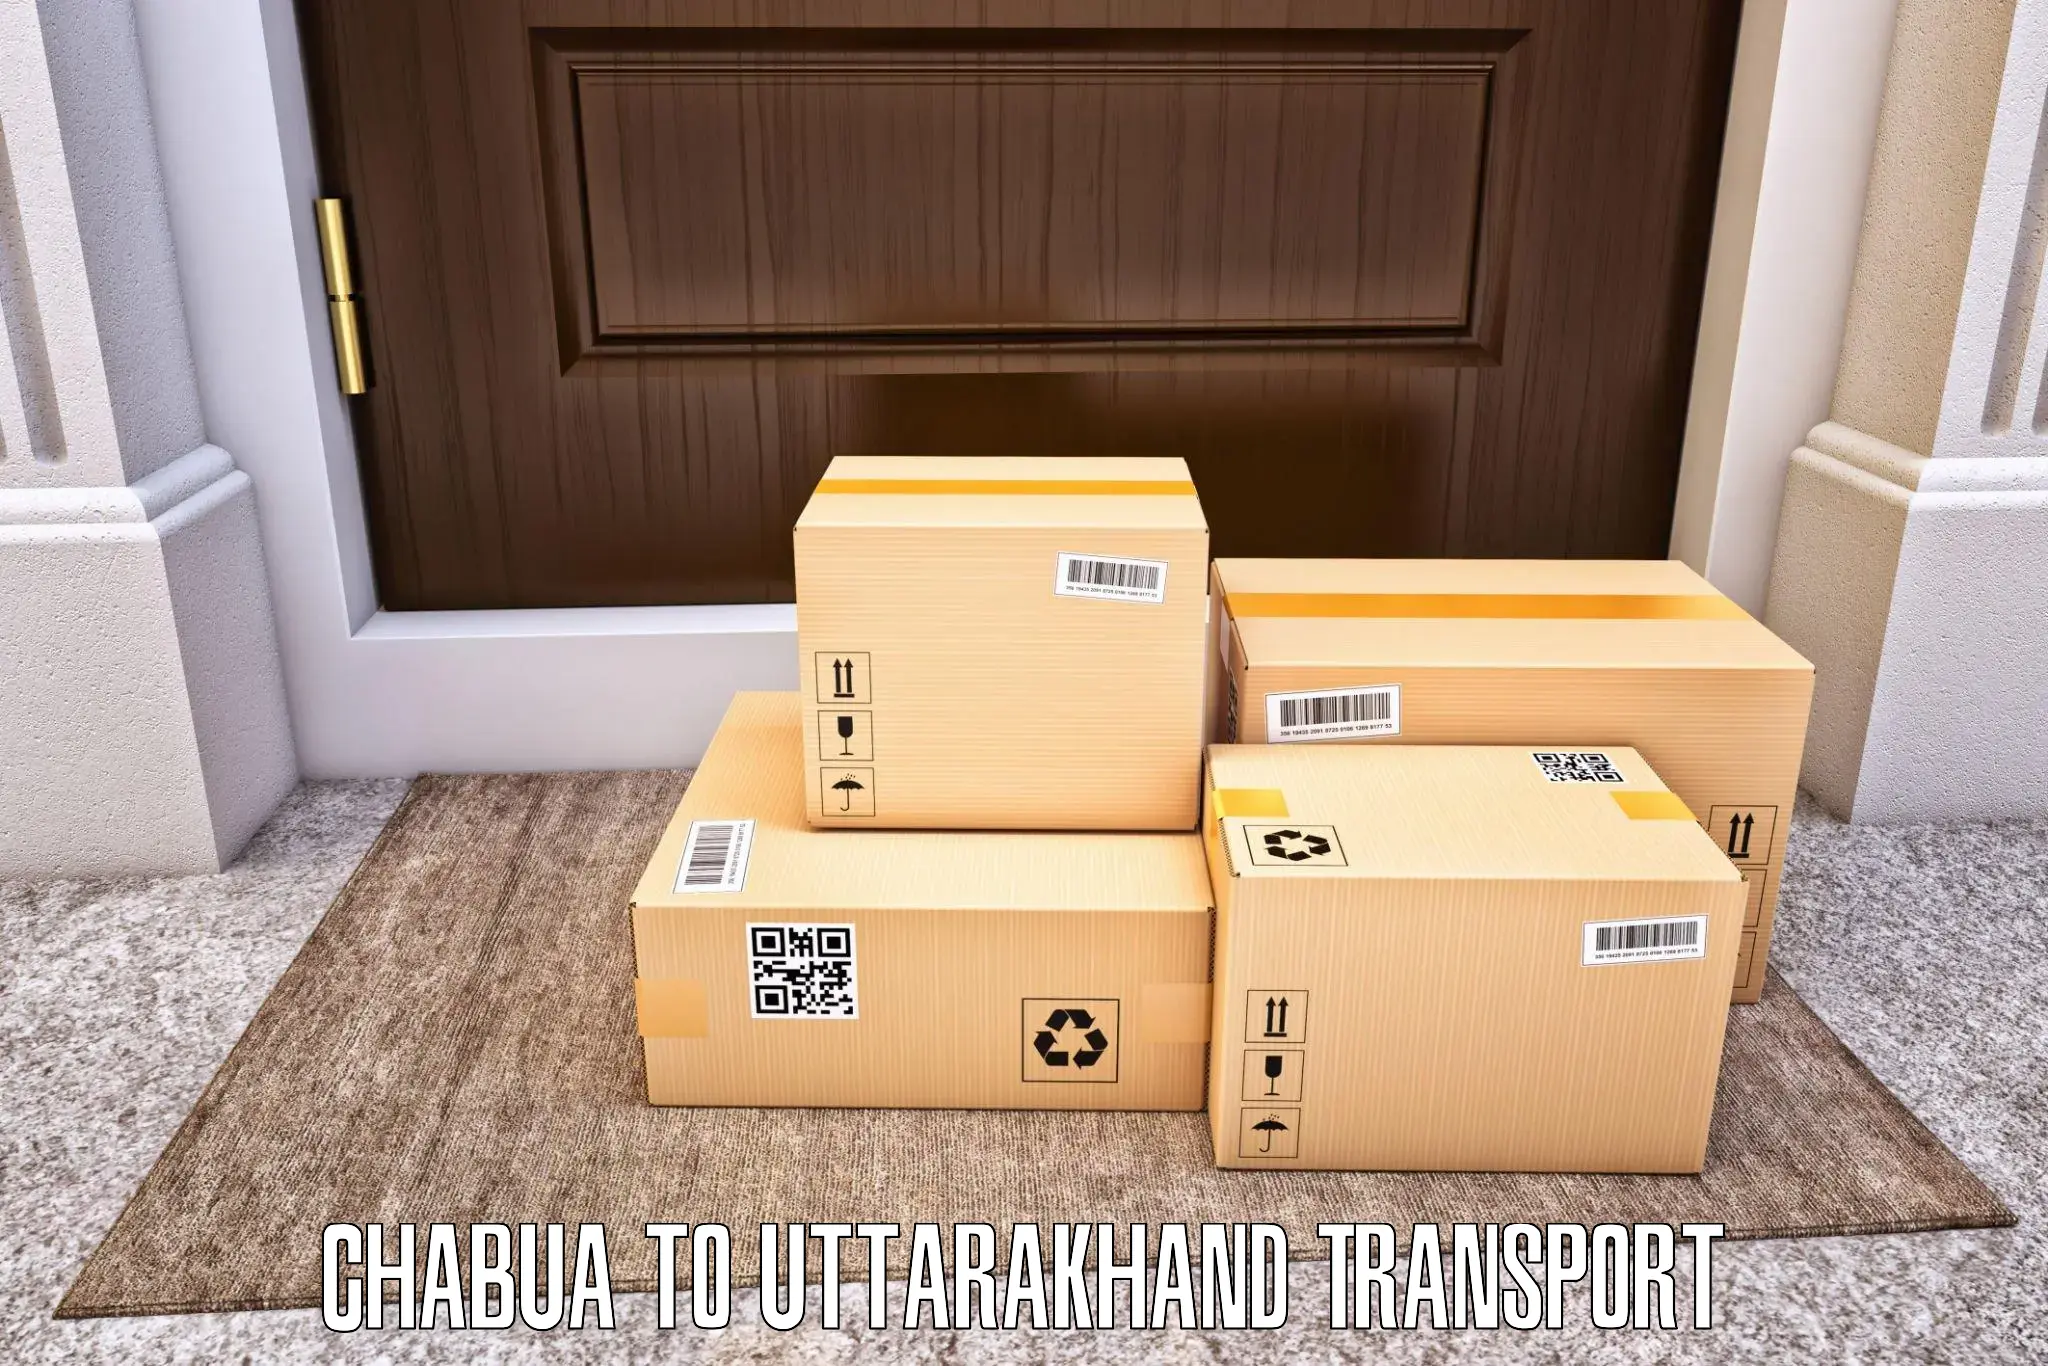 Luggage transport services in Chabua to Mussoorie